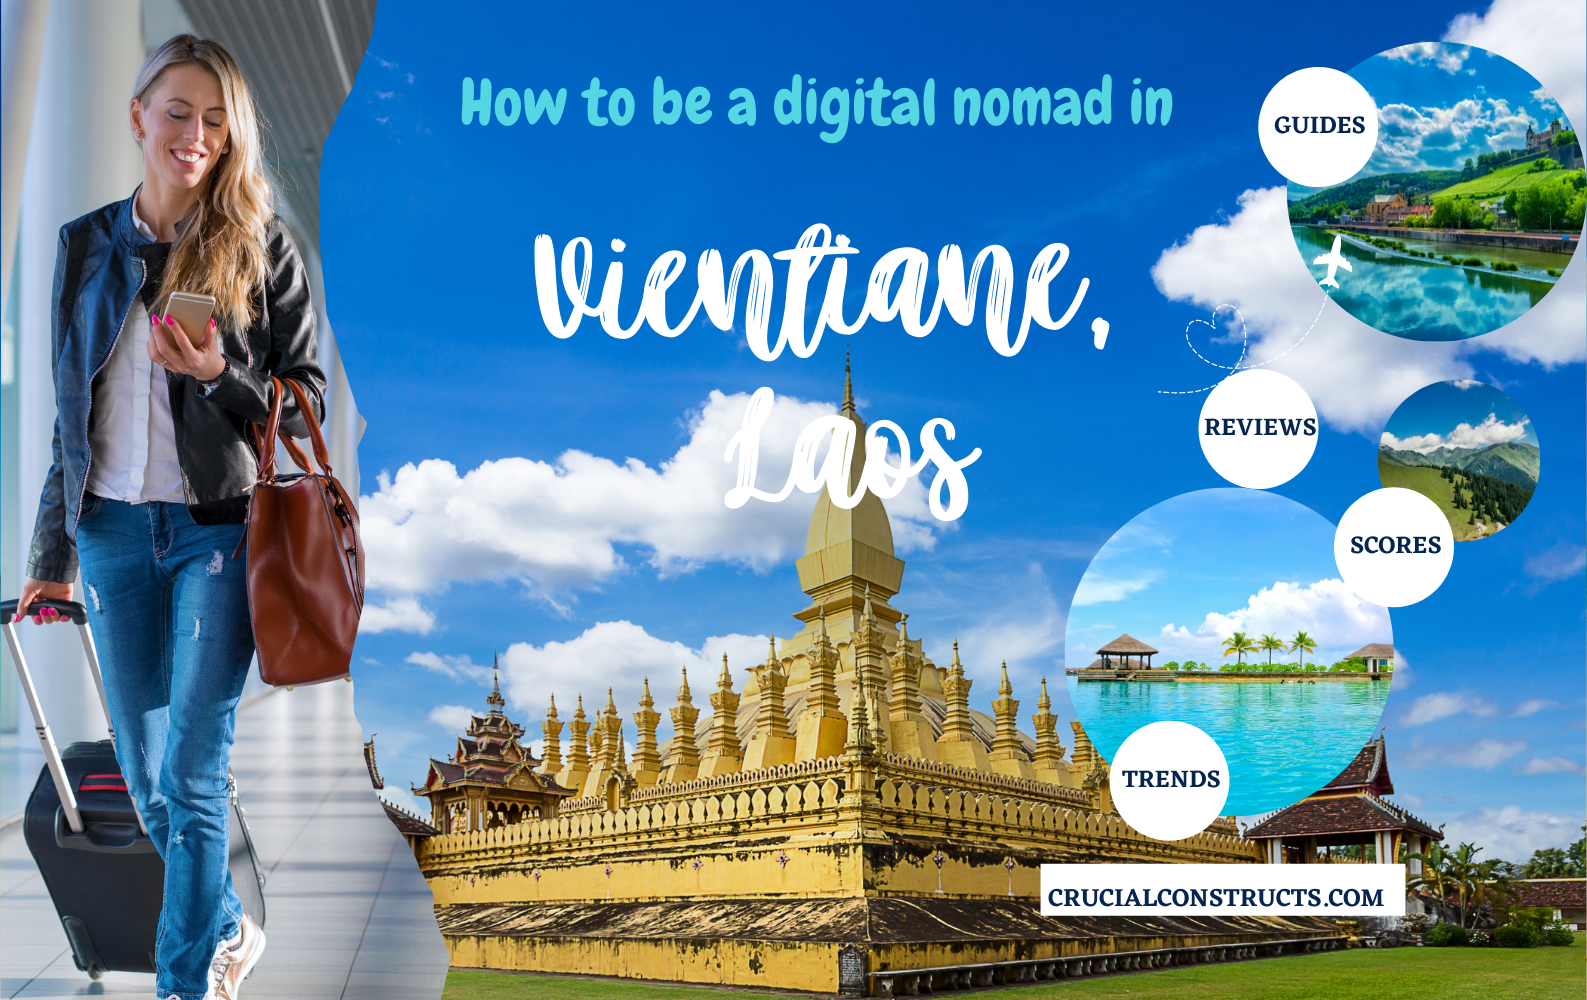 Vientiane, laos how to be a digital nomad